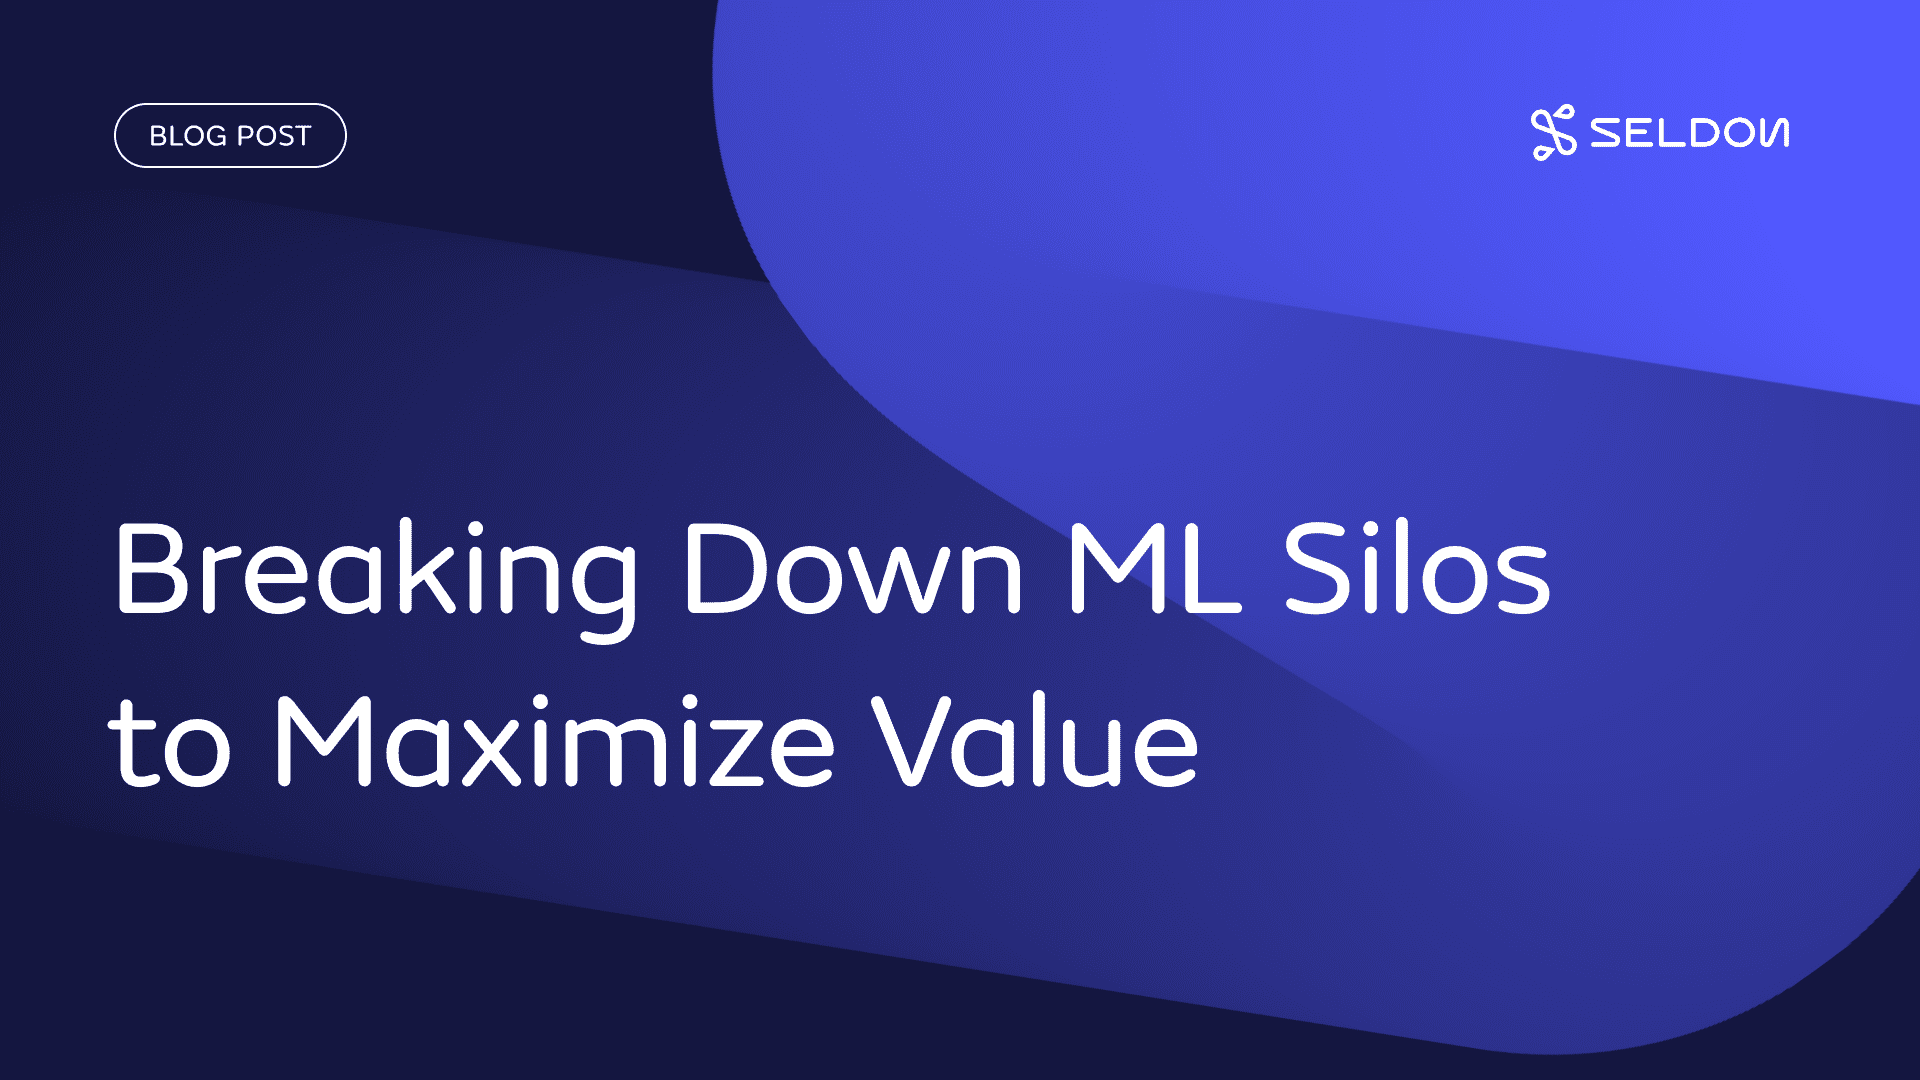 Breaking Down Machine Learning Silos to Maximise Value